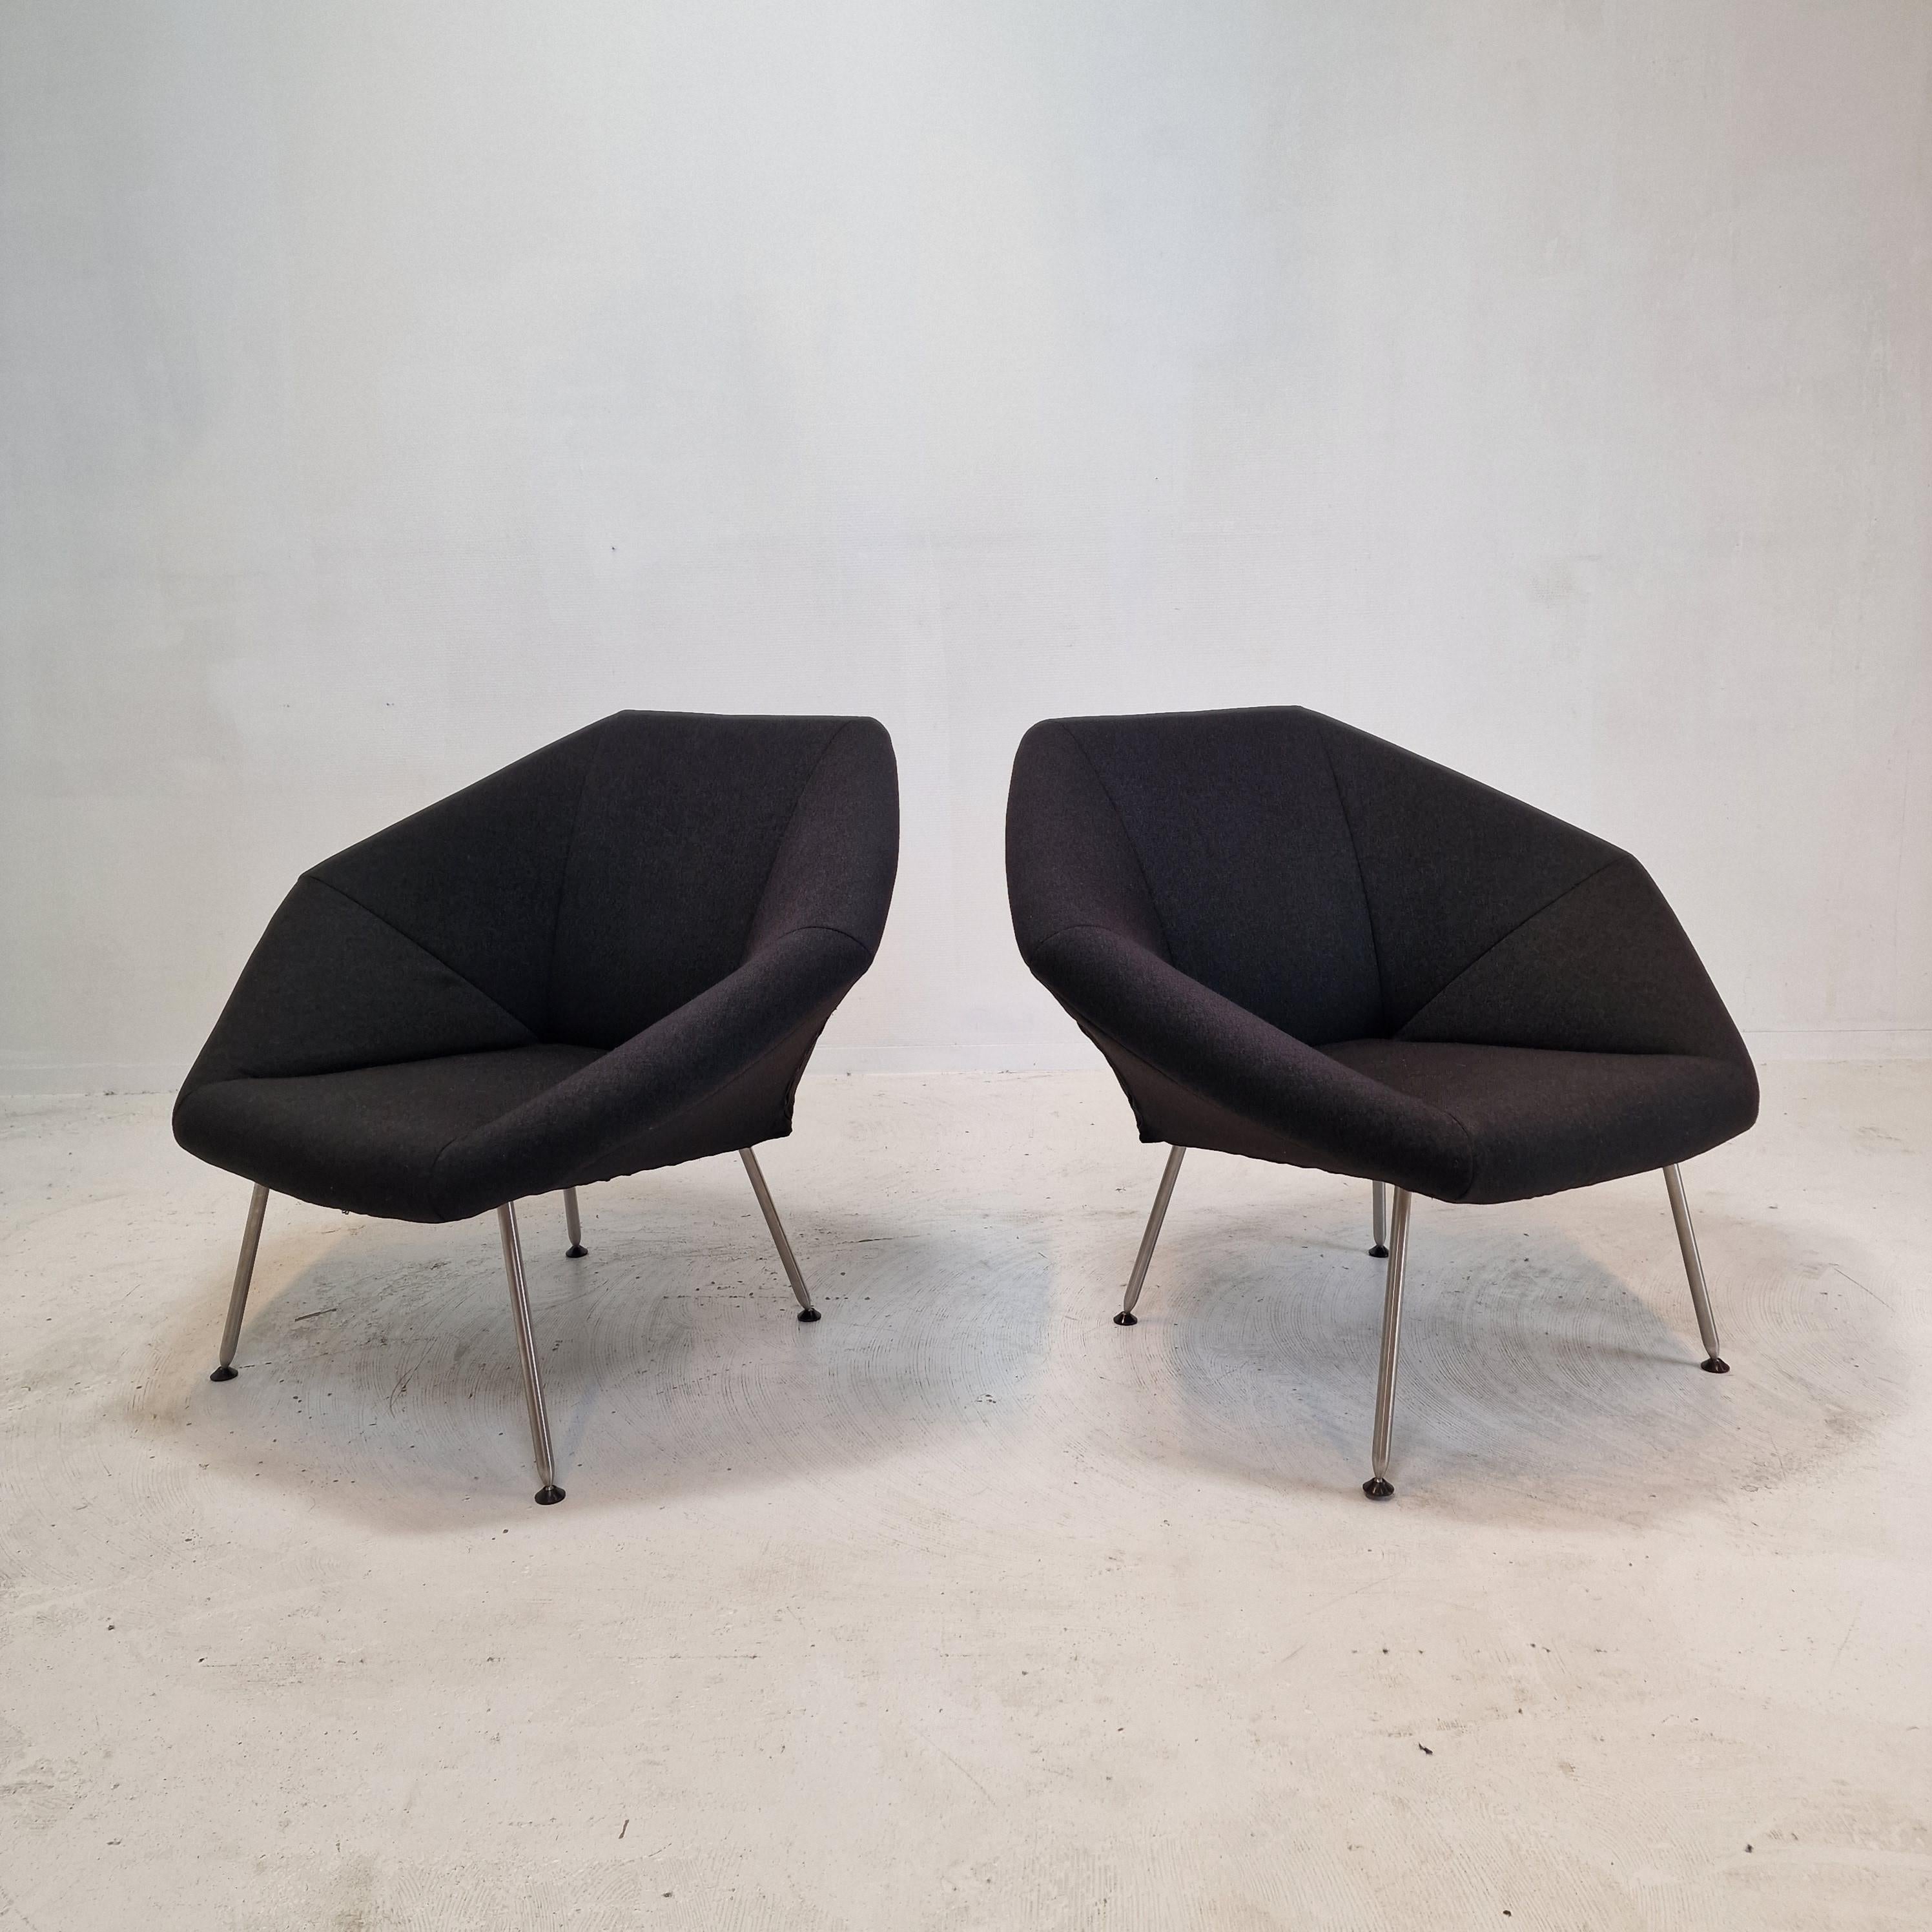 Lovely set of 2 lounge or side chairs, fabricated in the Netherlands by Kaleidos.
These comfortable chairs are fabricated in the 80's.

The black wool fabric is in very good condition.

We work with professional packers and shippers, we can